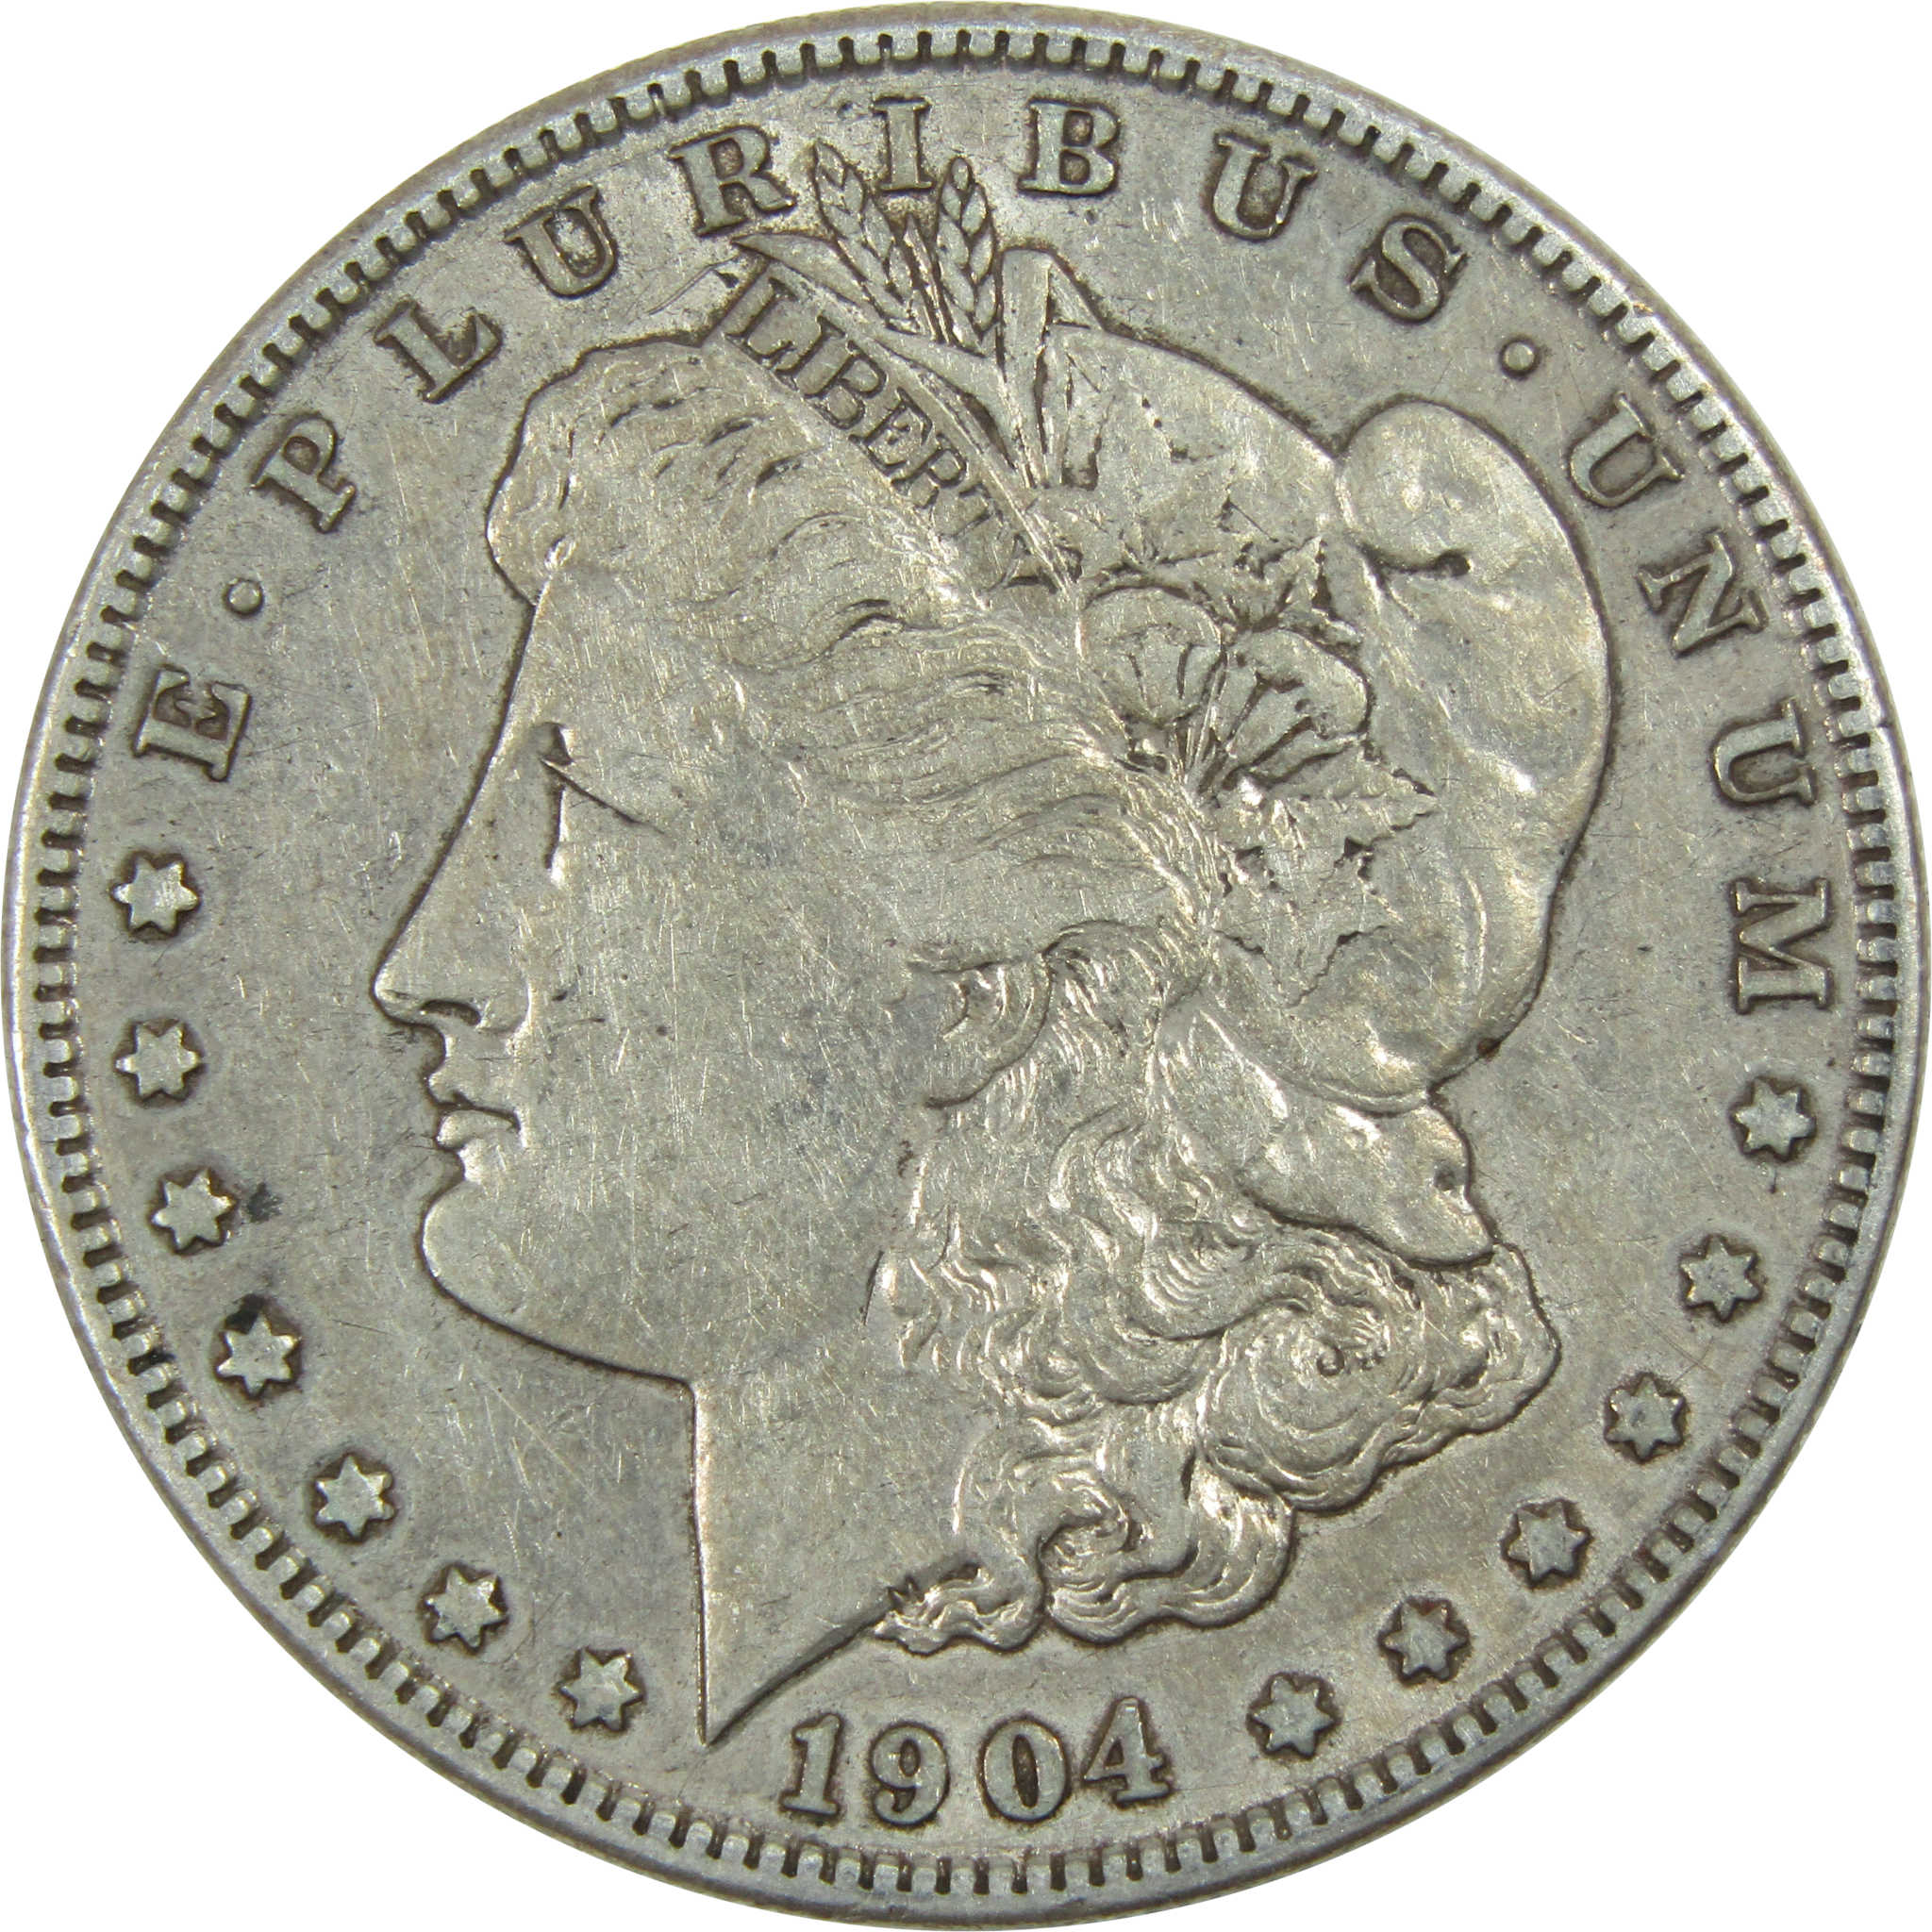 1904 S Morgan Dollar VF Very Fine Details Silver $1 Coin SKU:I13121 - Morgan coin - Morgan silver dollar - Morgan silver dollar for sale - Profile Coins &amp; Collectibles